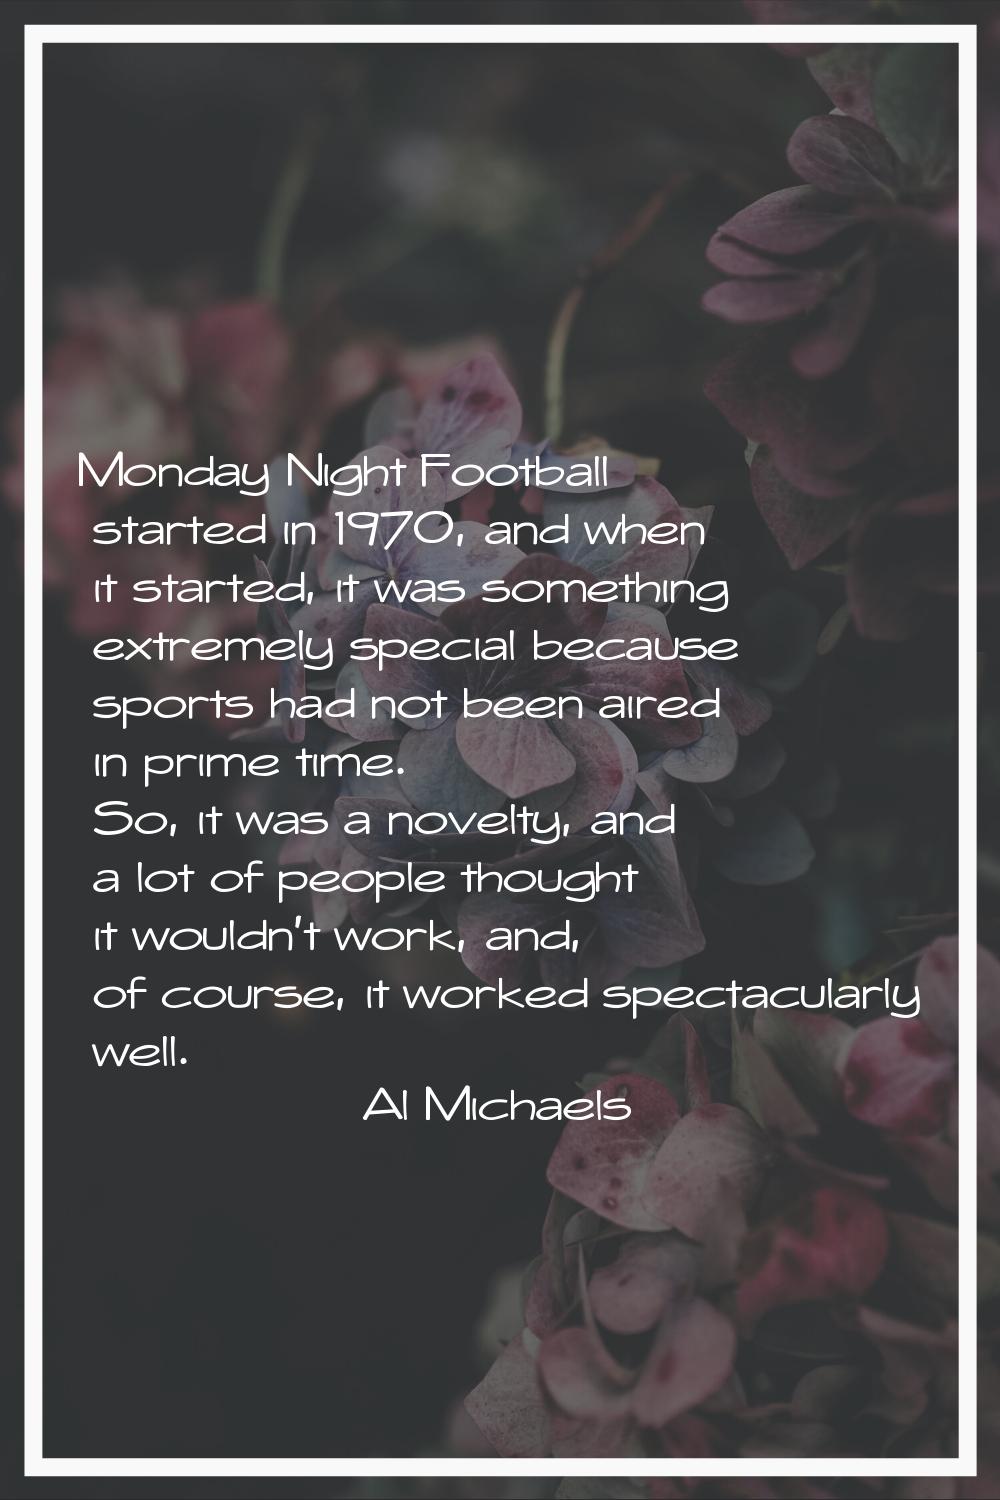 Monday Night Football started in 1970, and when it started, it was something extremely special beca